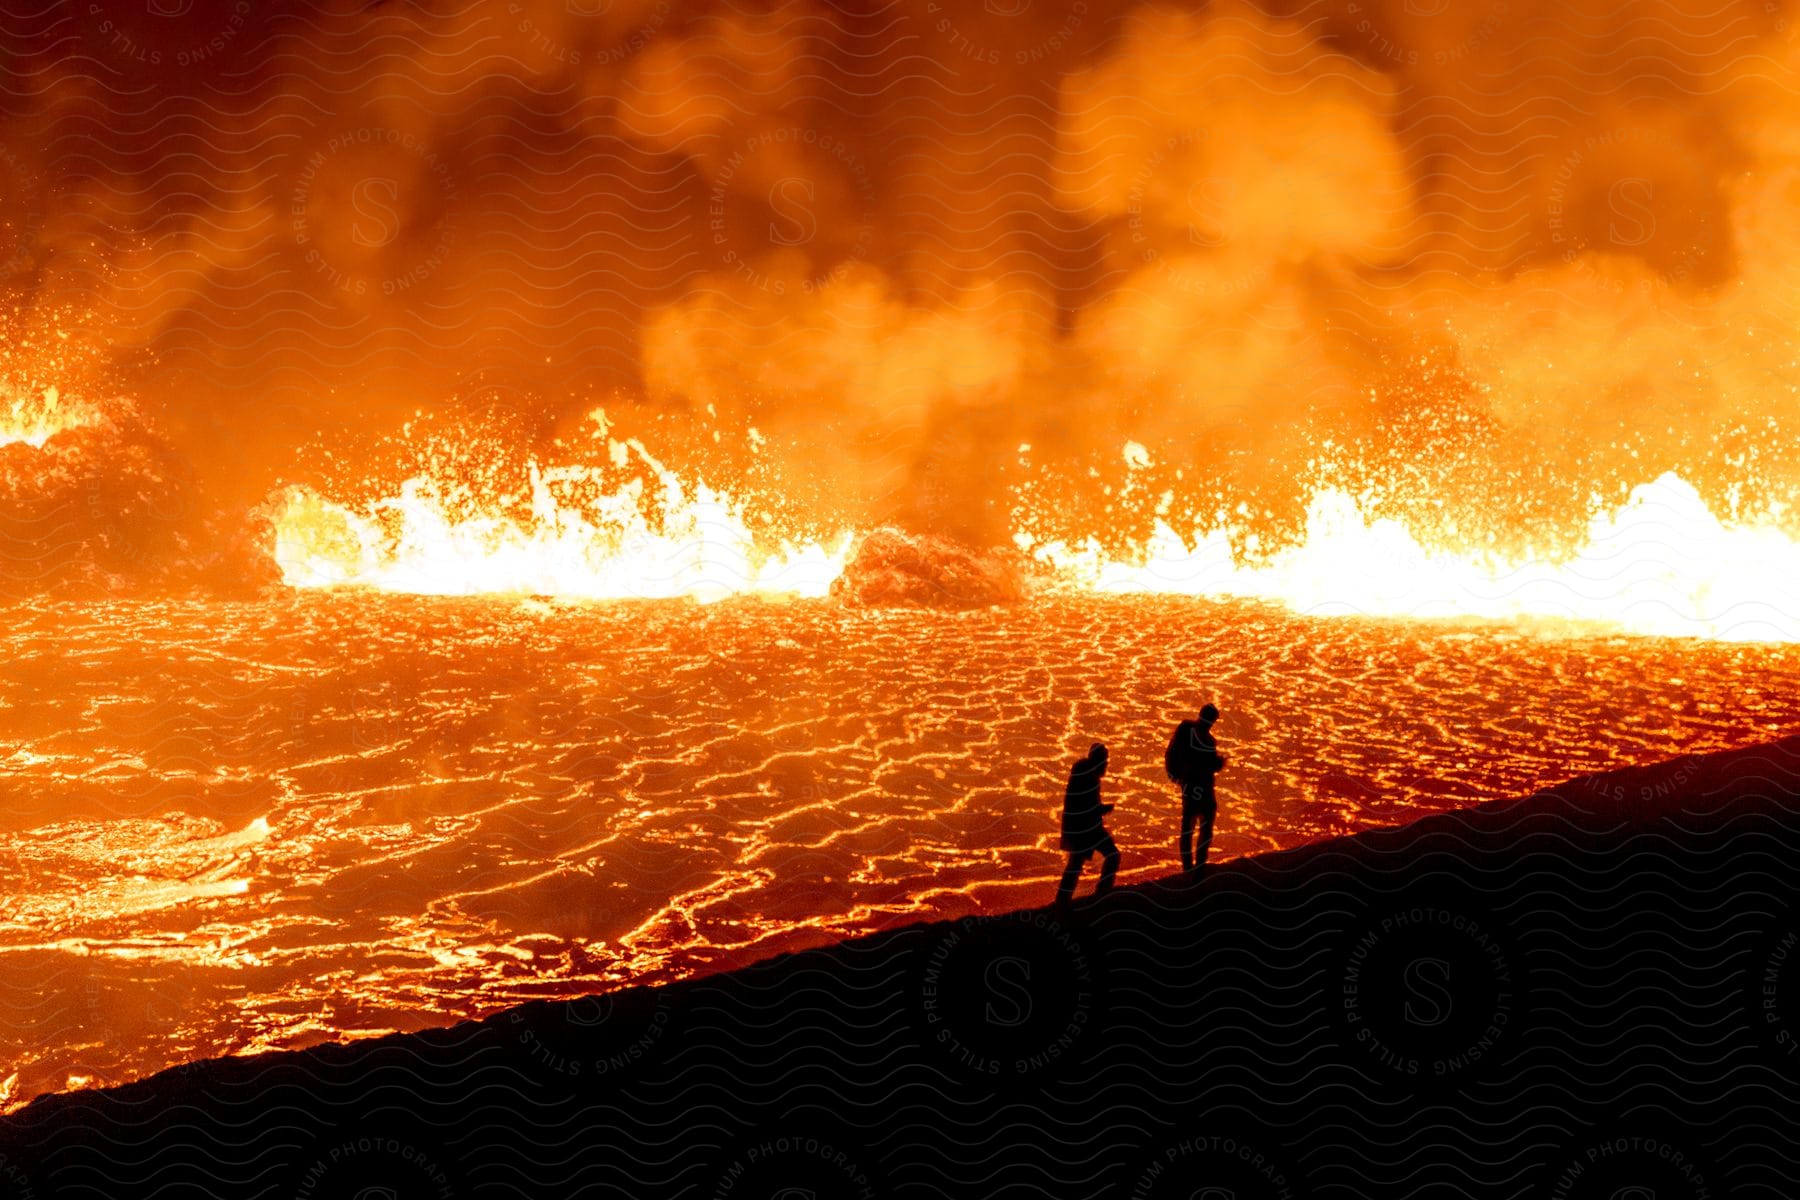 Silhouettes of two people standing on a hill overlooking glowing splashing lava in an erupting volcano